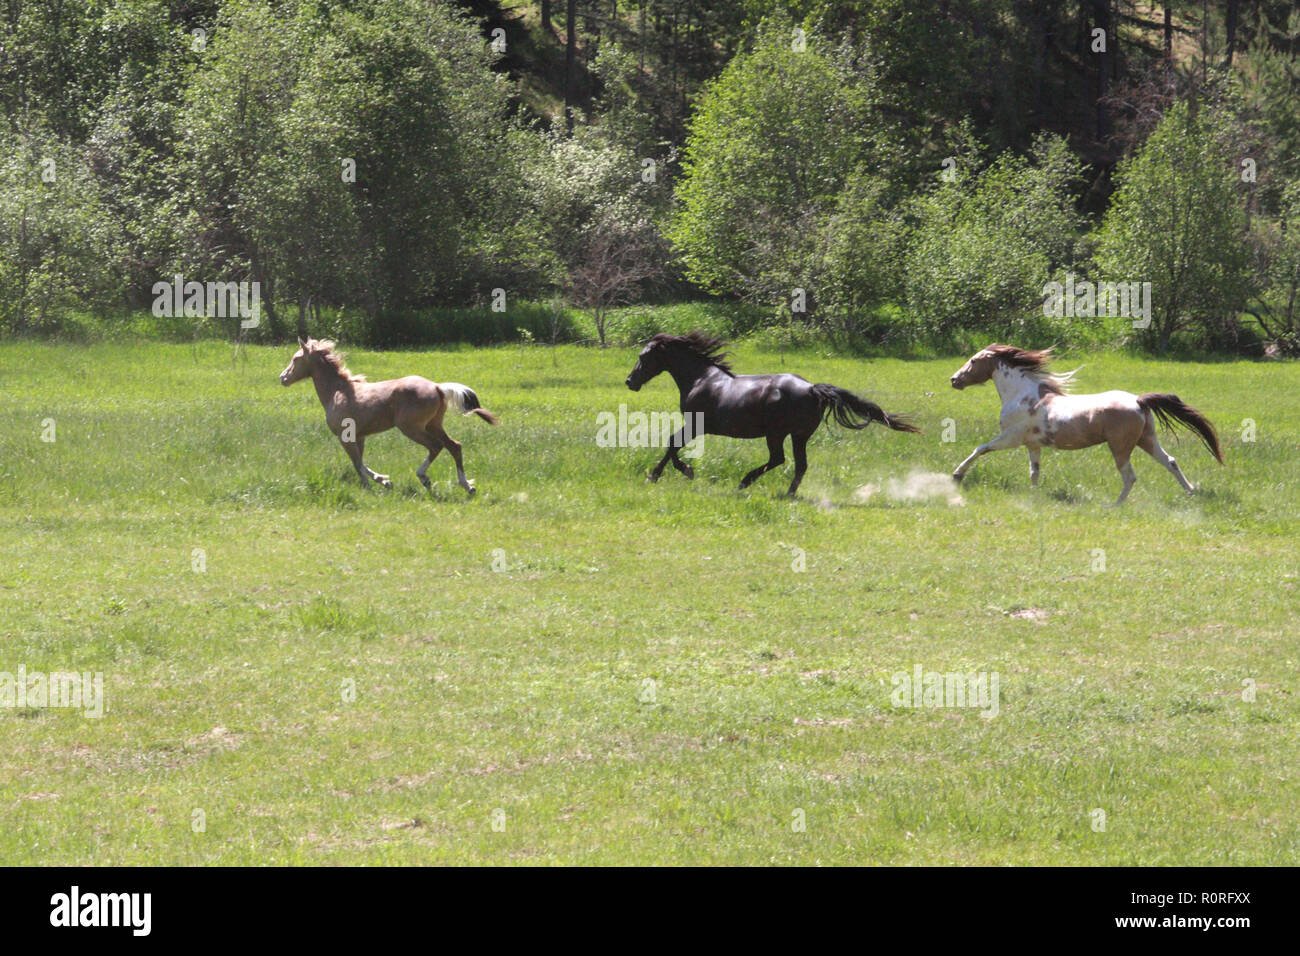 A trio of horses running free Stock Photo